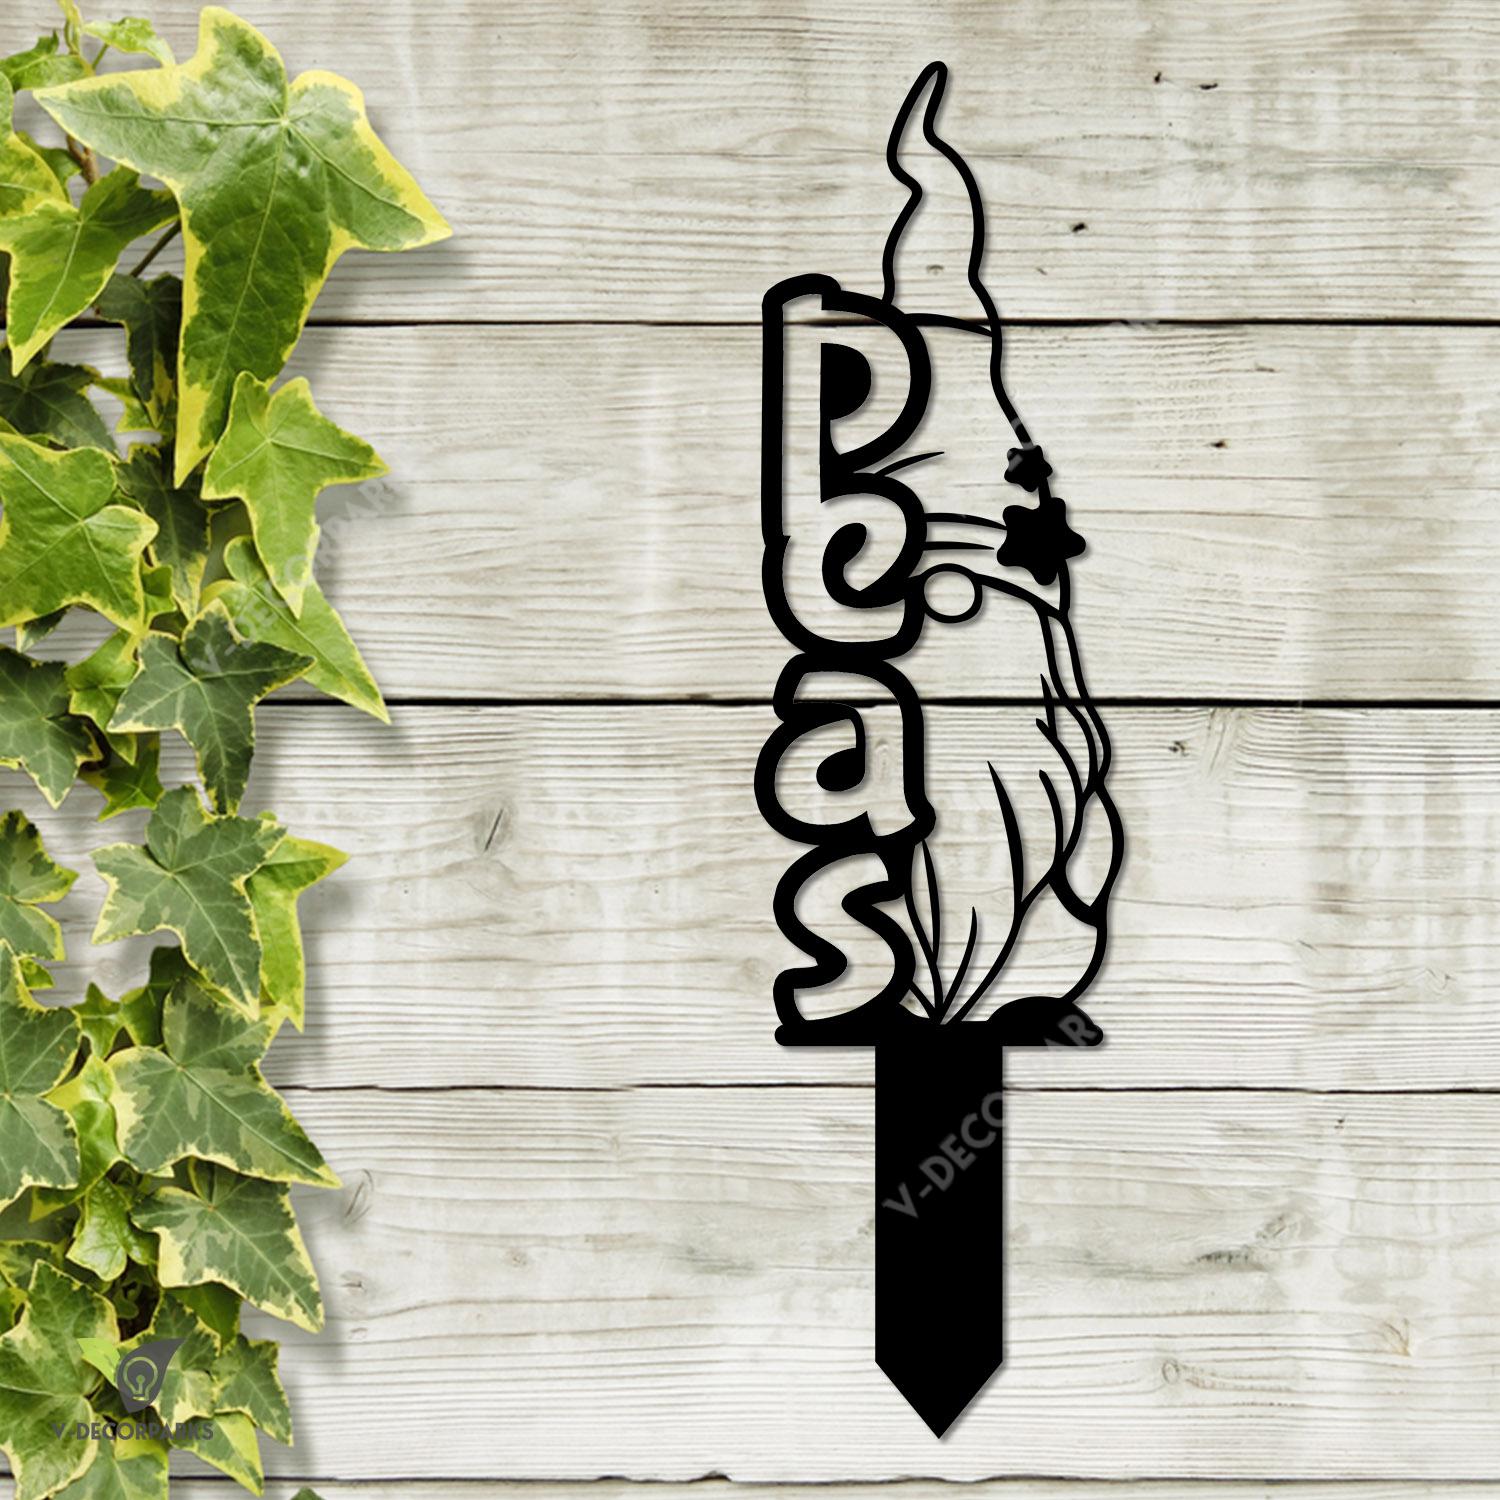 Peas Gnome Metal Garden Decoration, Peas Vegetables Markers Weatherproof Accent For Mom Metal Sign